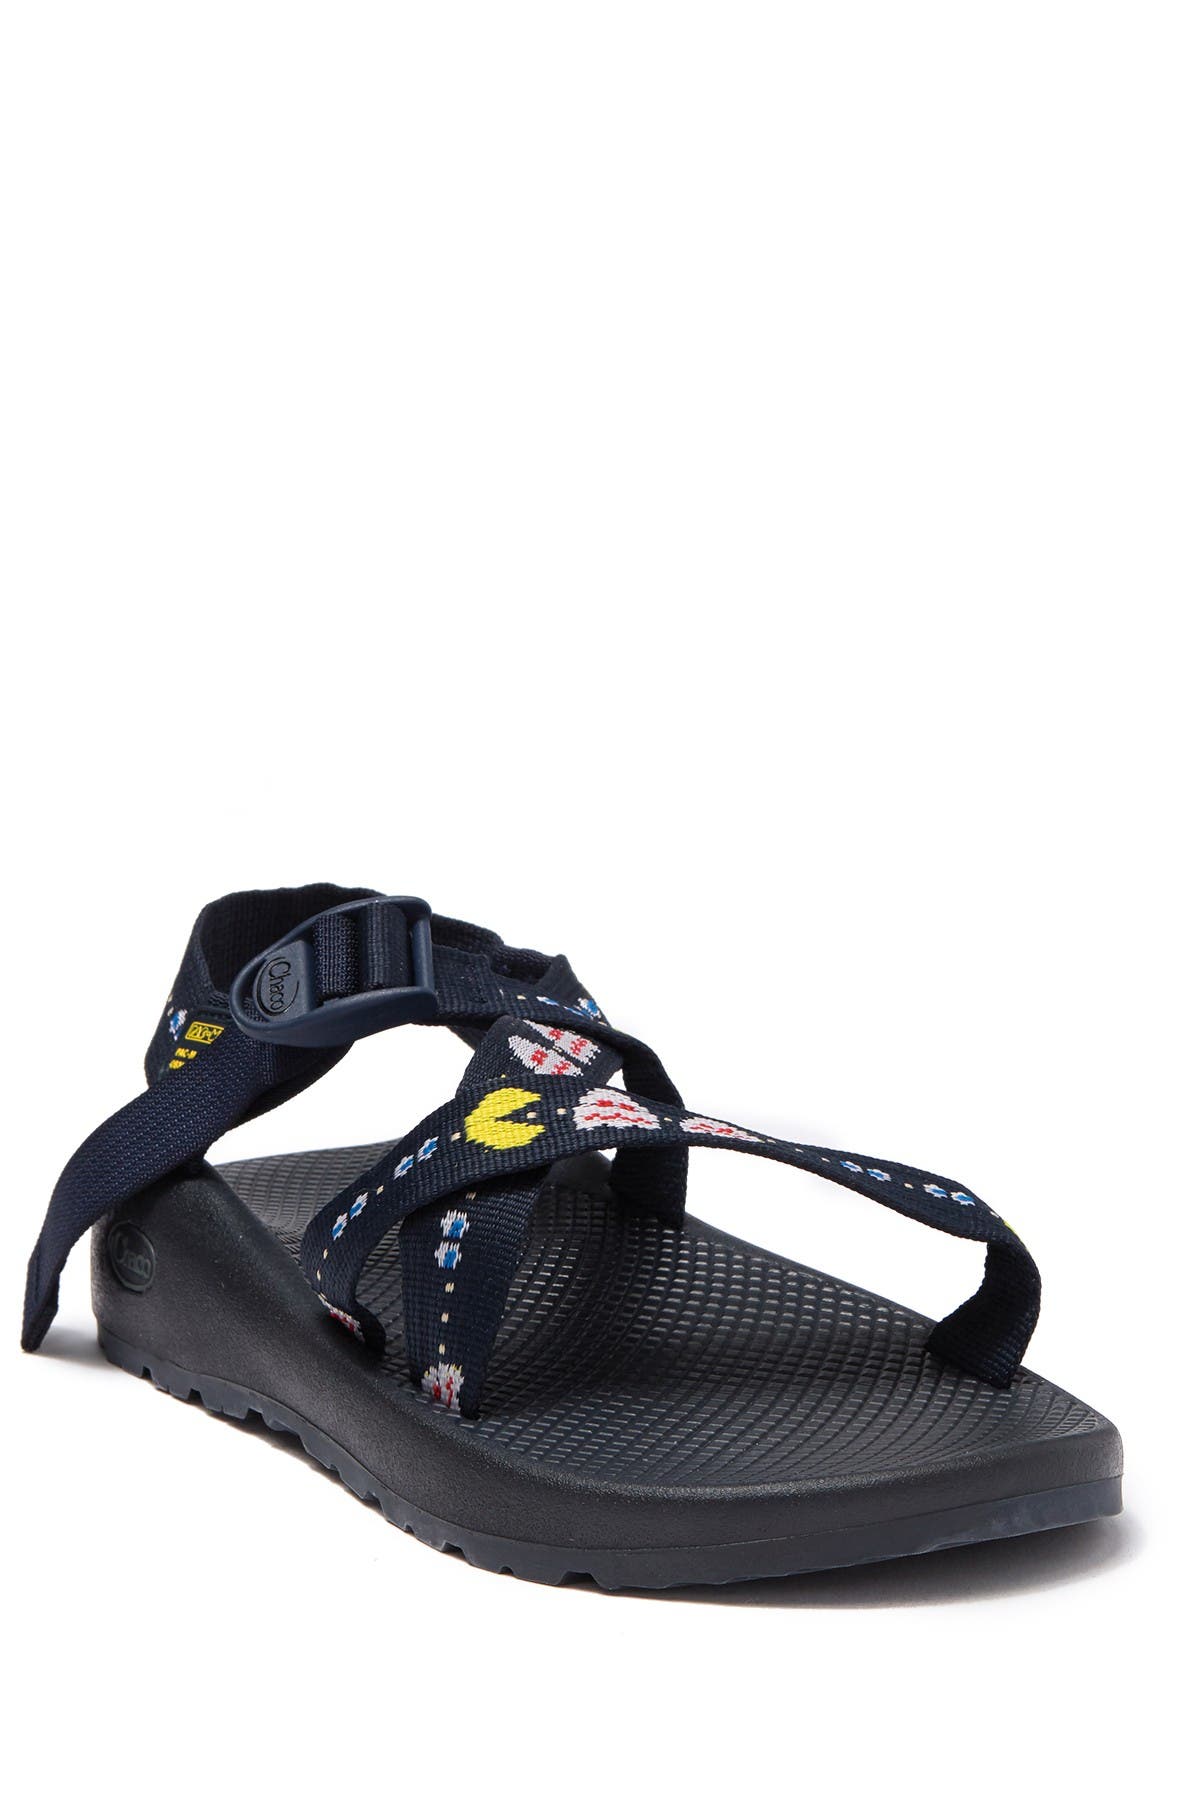 pac man chacos